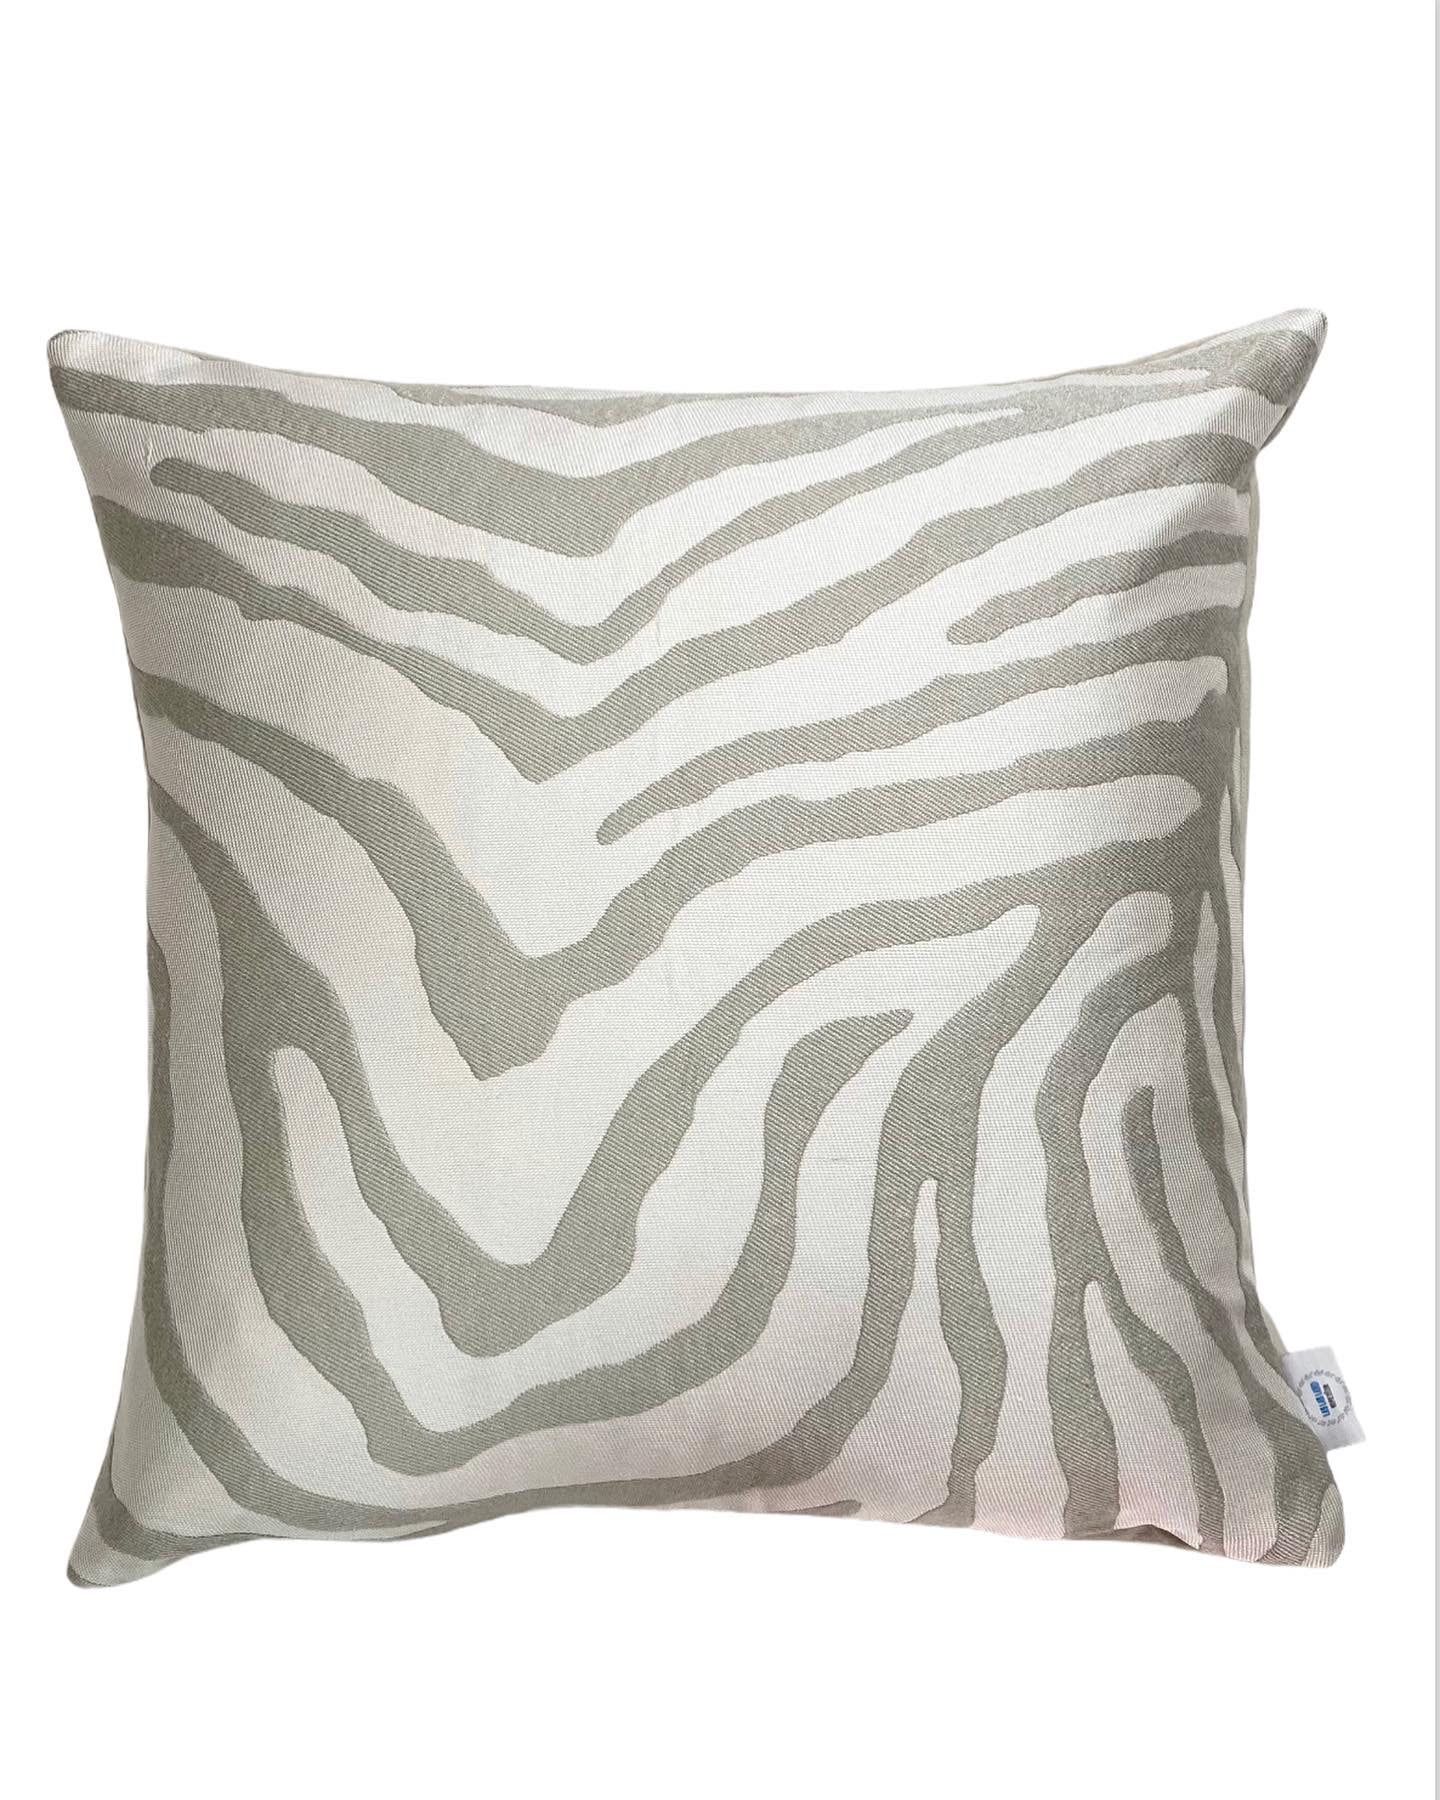 White and Beige Zebra Animal Print Decorative Toss Throw Pillow Cover ONLY 20x20 | Walmart (US)